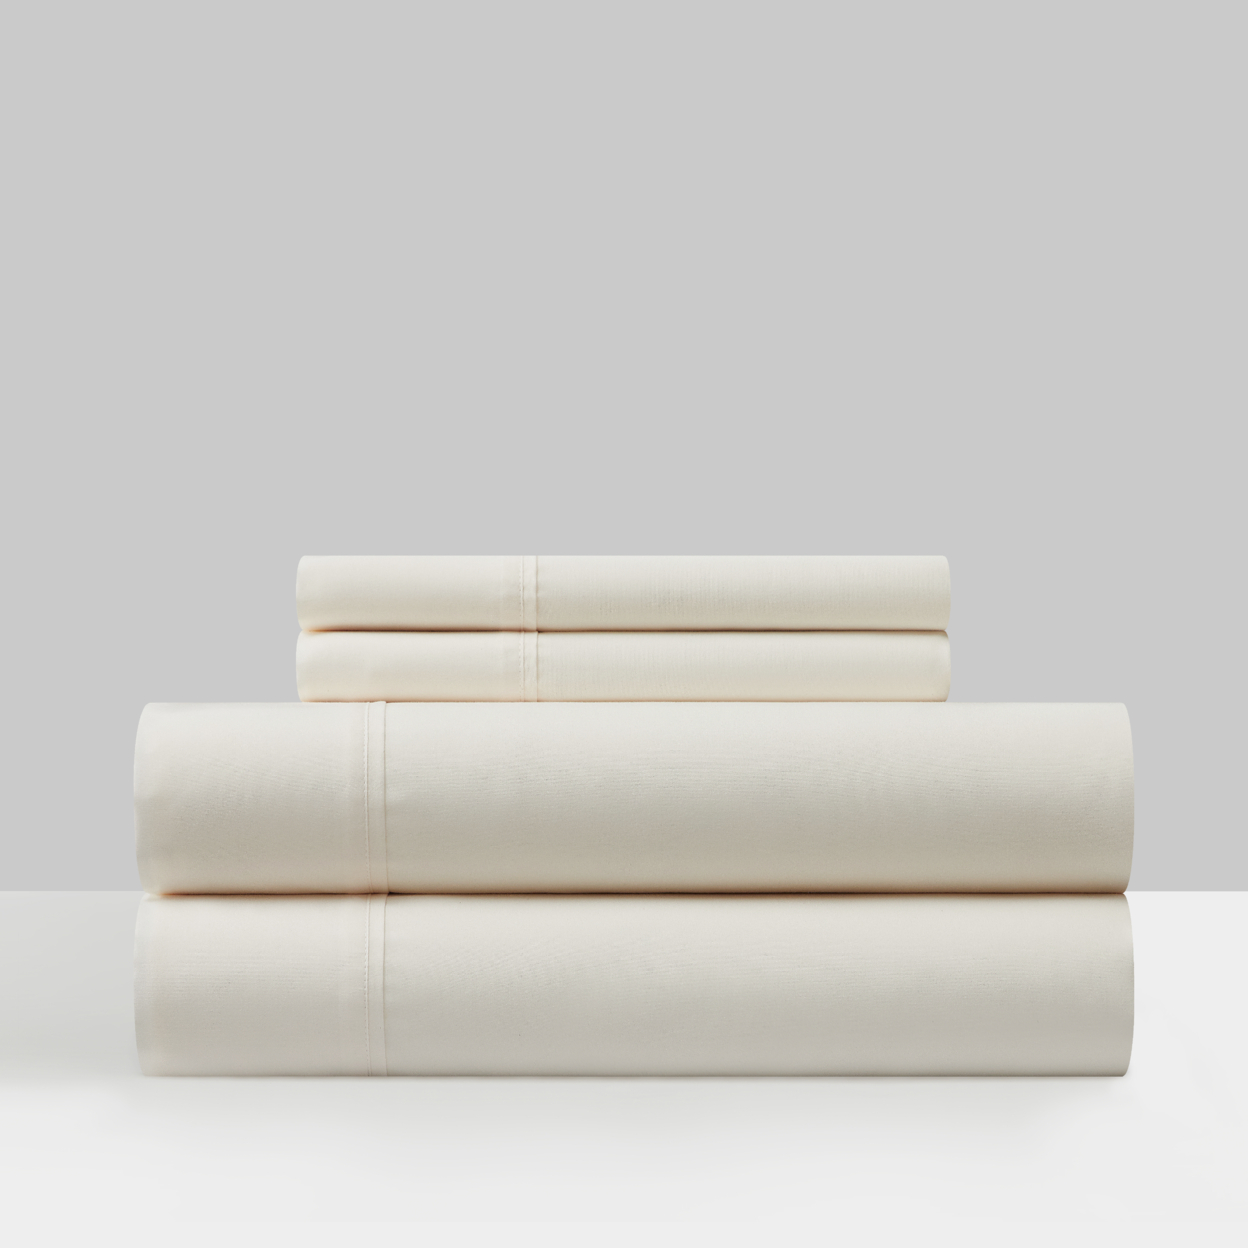 Shton 3 Or 4 Piece Sheet Set Super Soft Solid Color With Piping Flange Edge - Beige, Twin